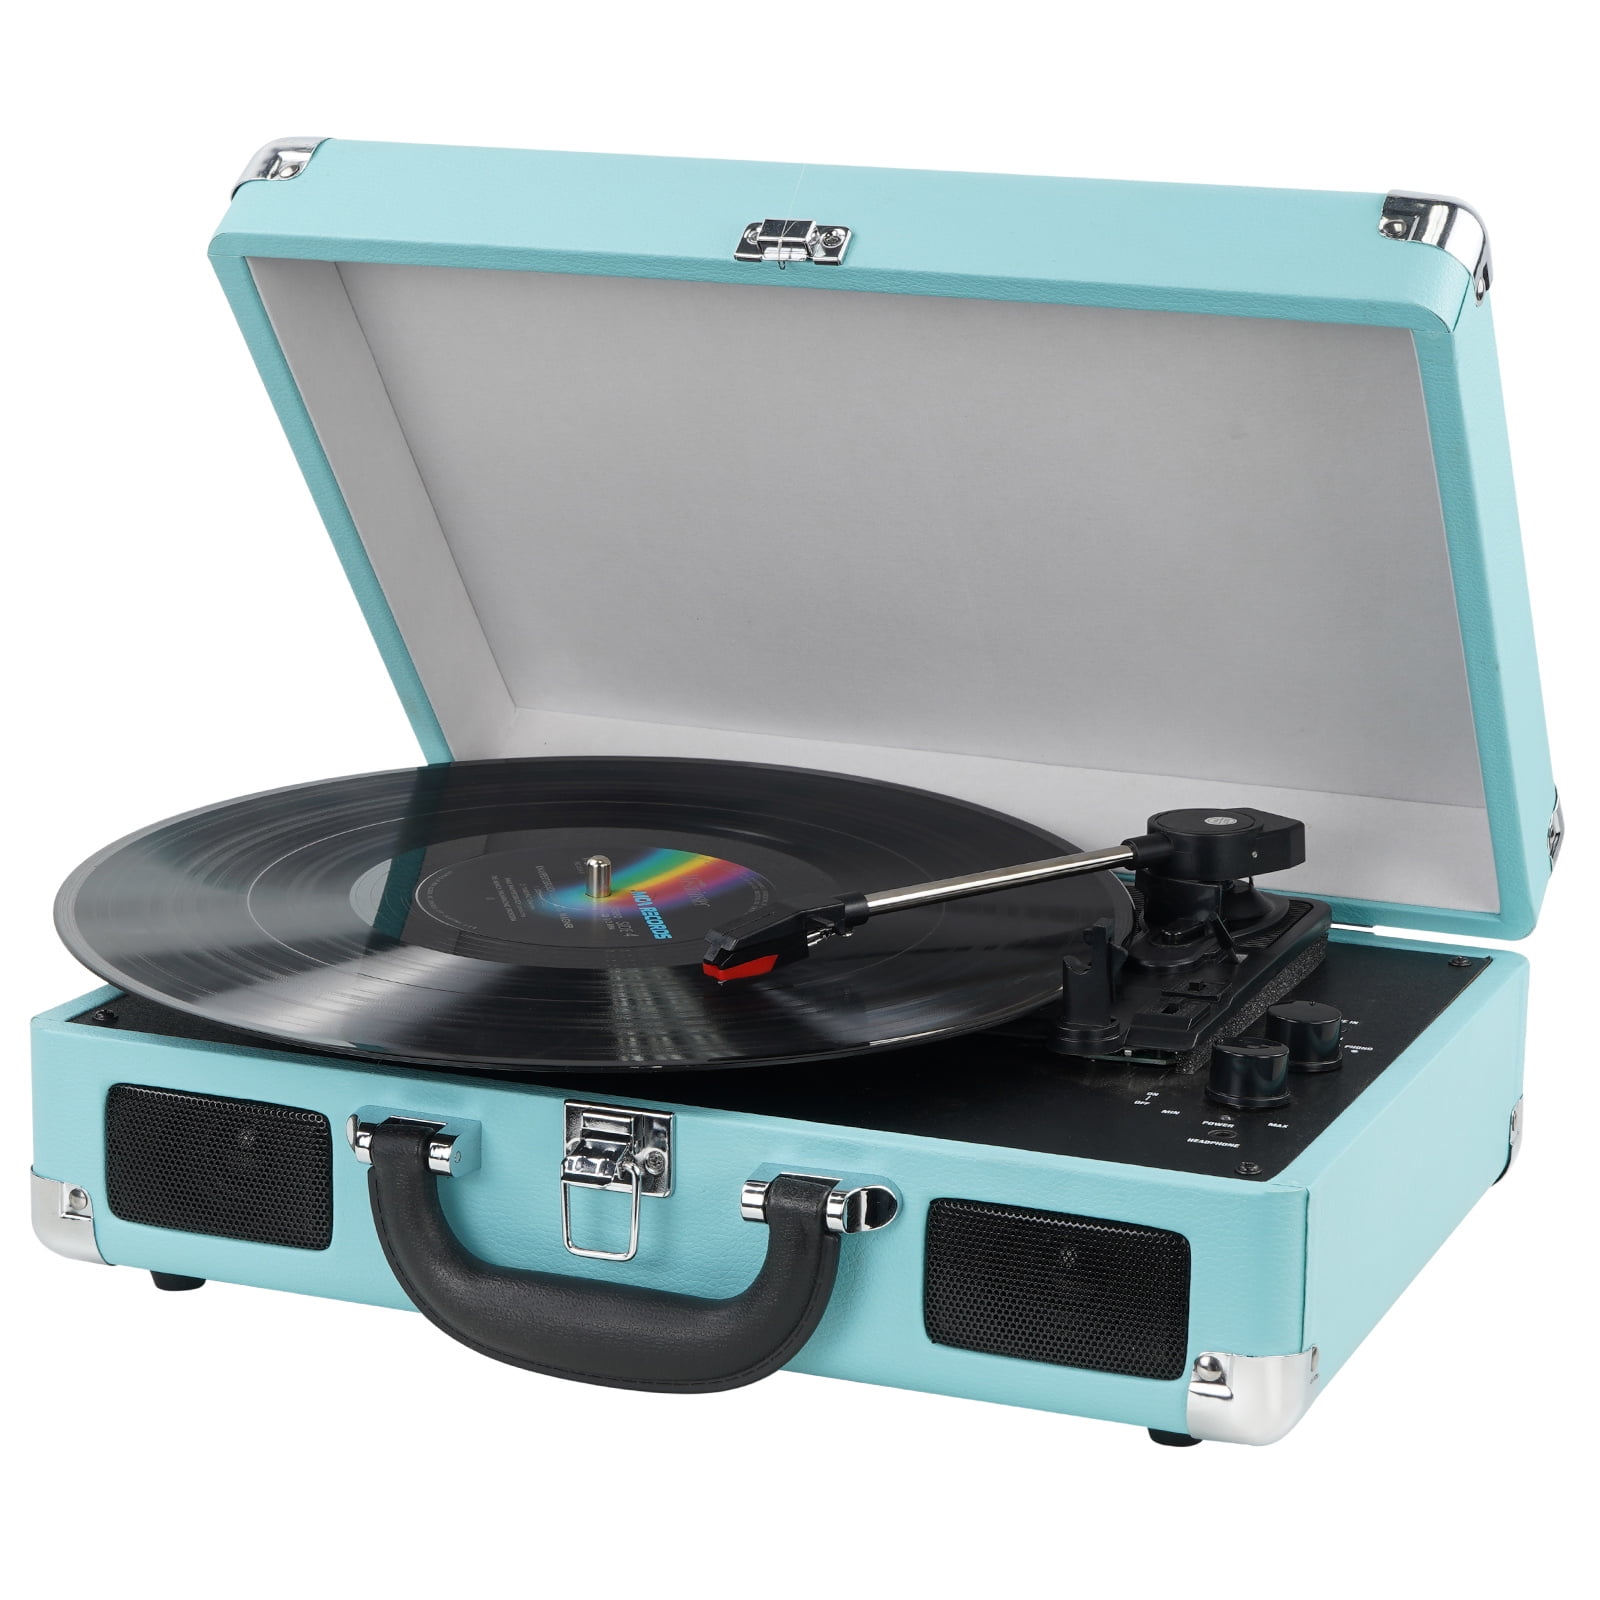 DIGITNOW Bluetooth Record Player 3 Speeds Turntable with Built-in Stereo  Speakers, Suitcase Design - Blue